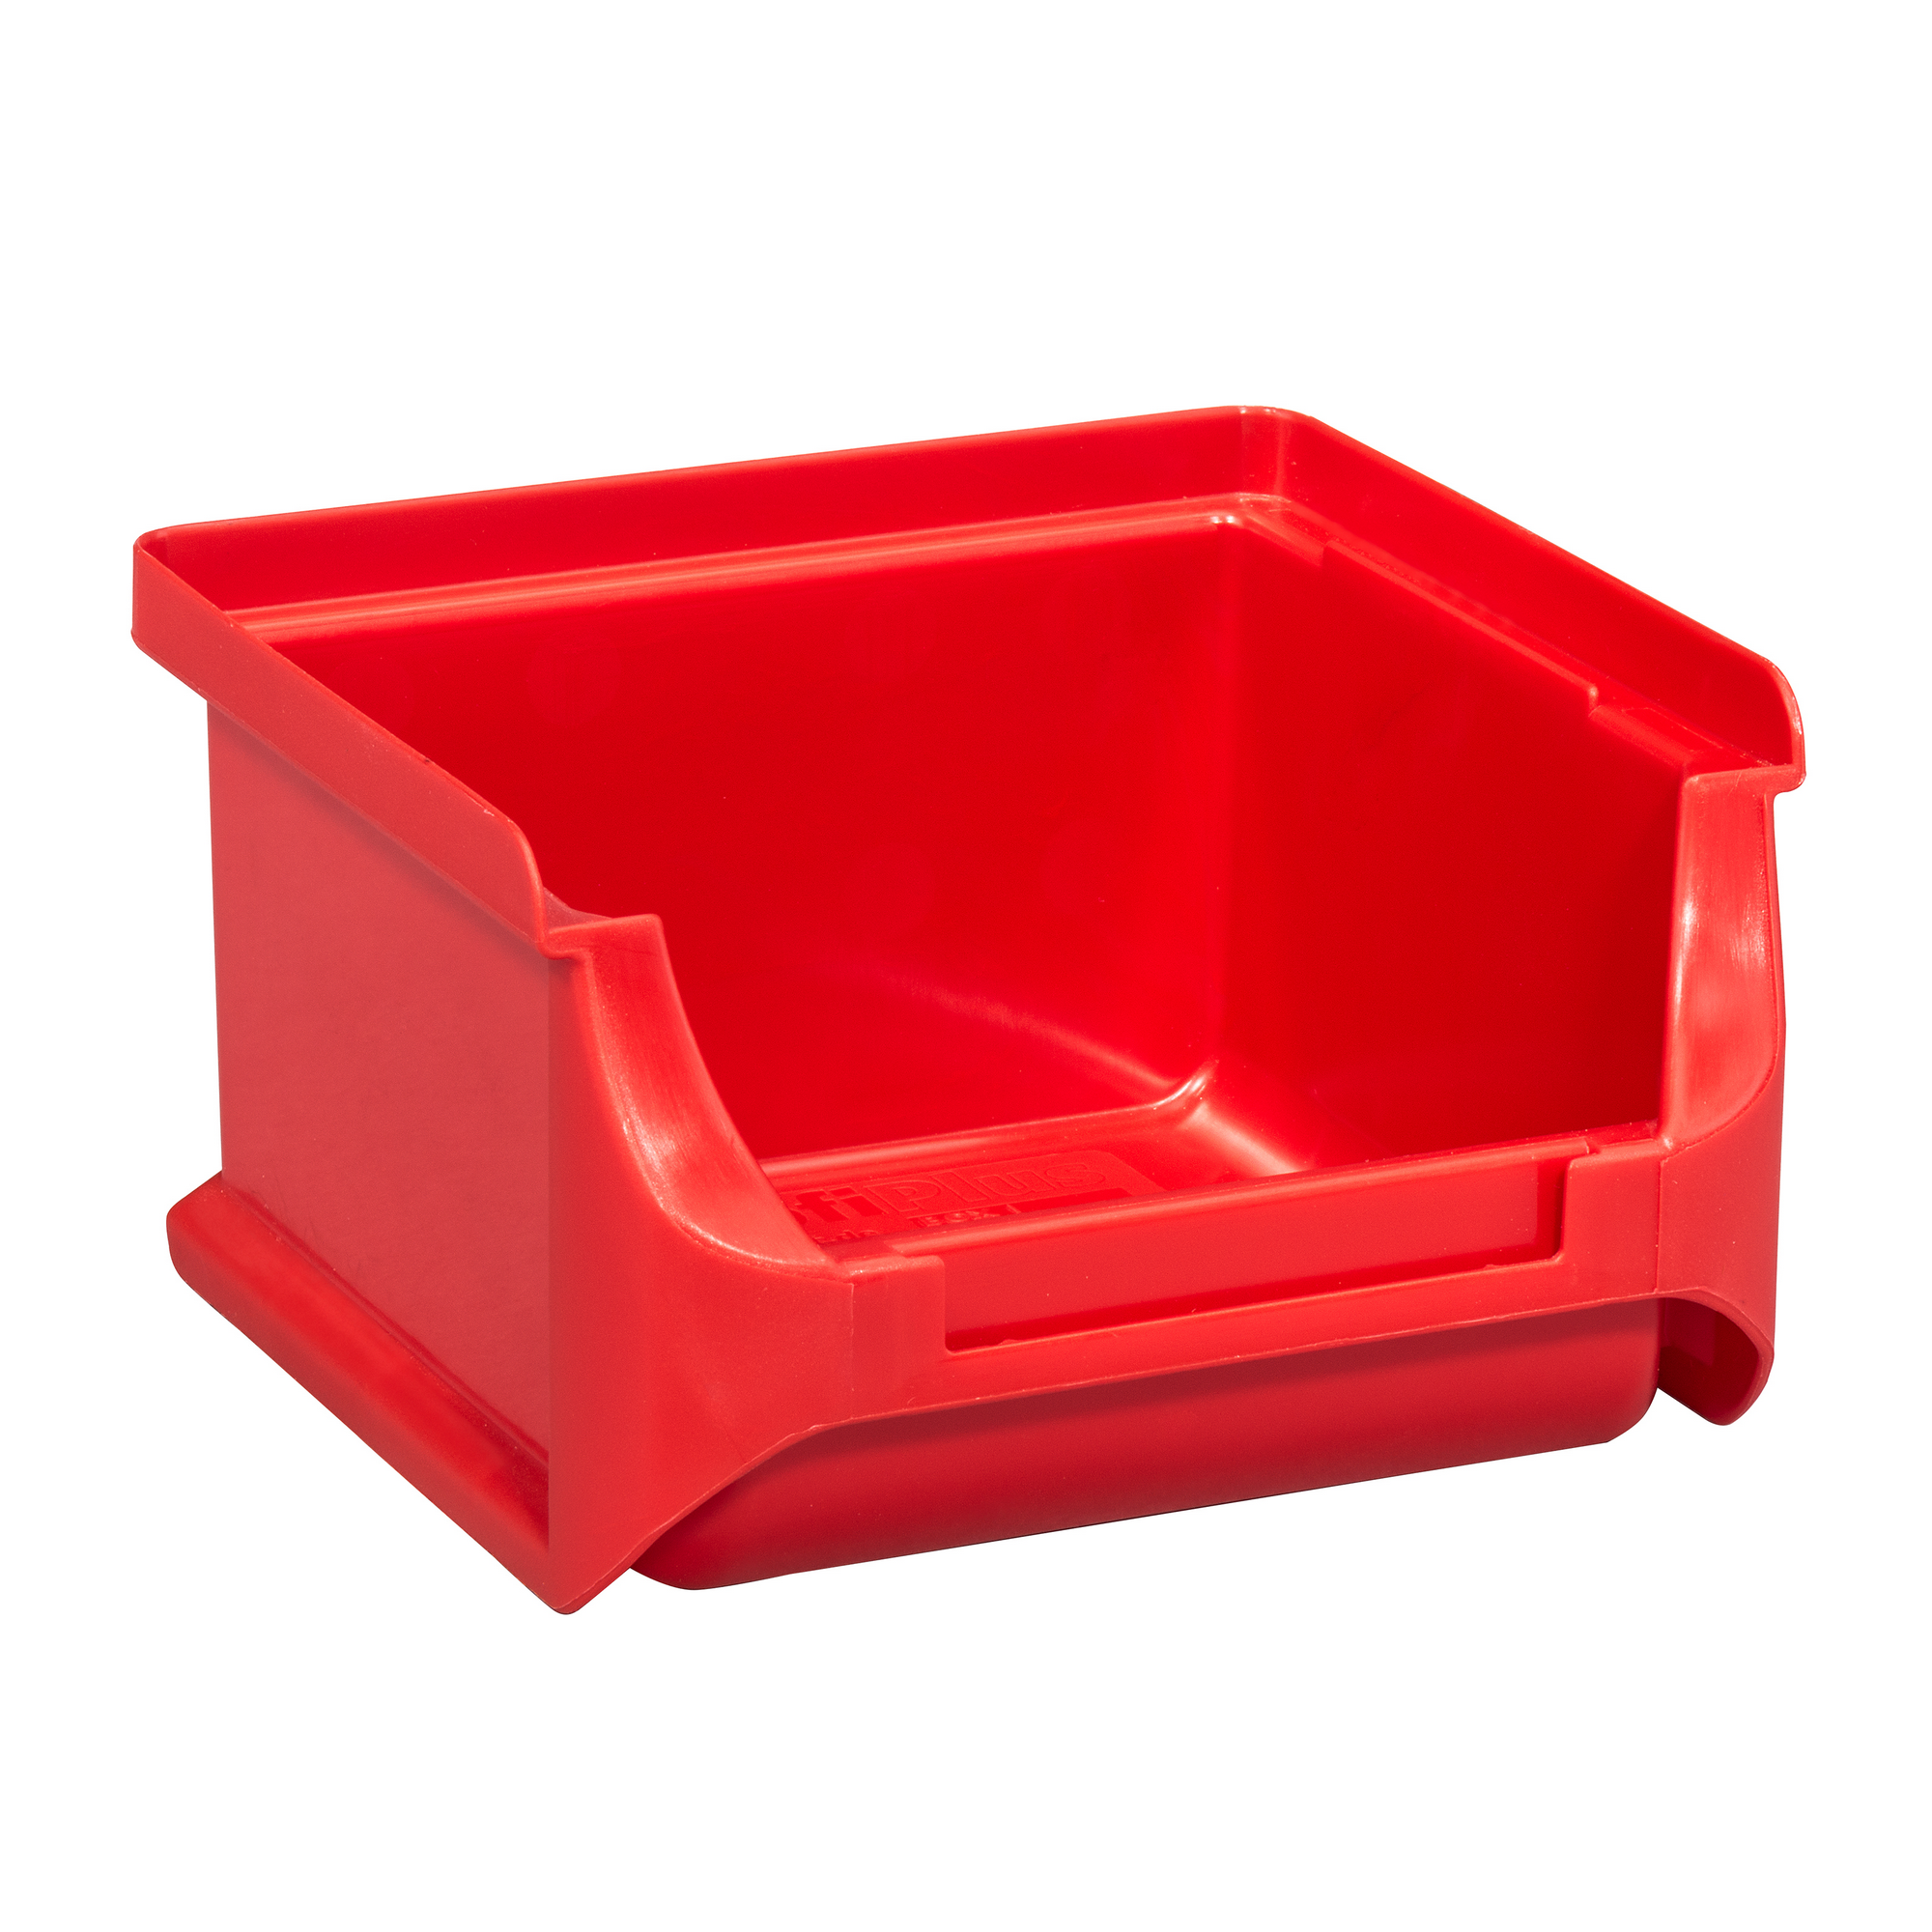 ProfiPlus Stapelsichtbox 'Box 1' rot 10,2 x 10 x 6 cm + product picture